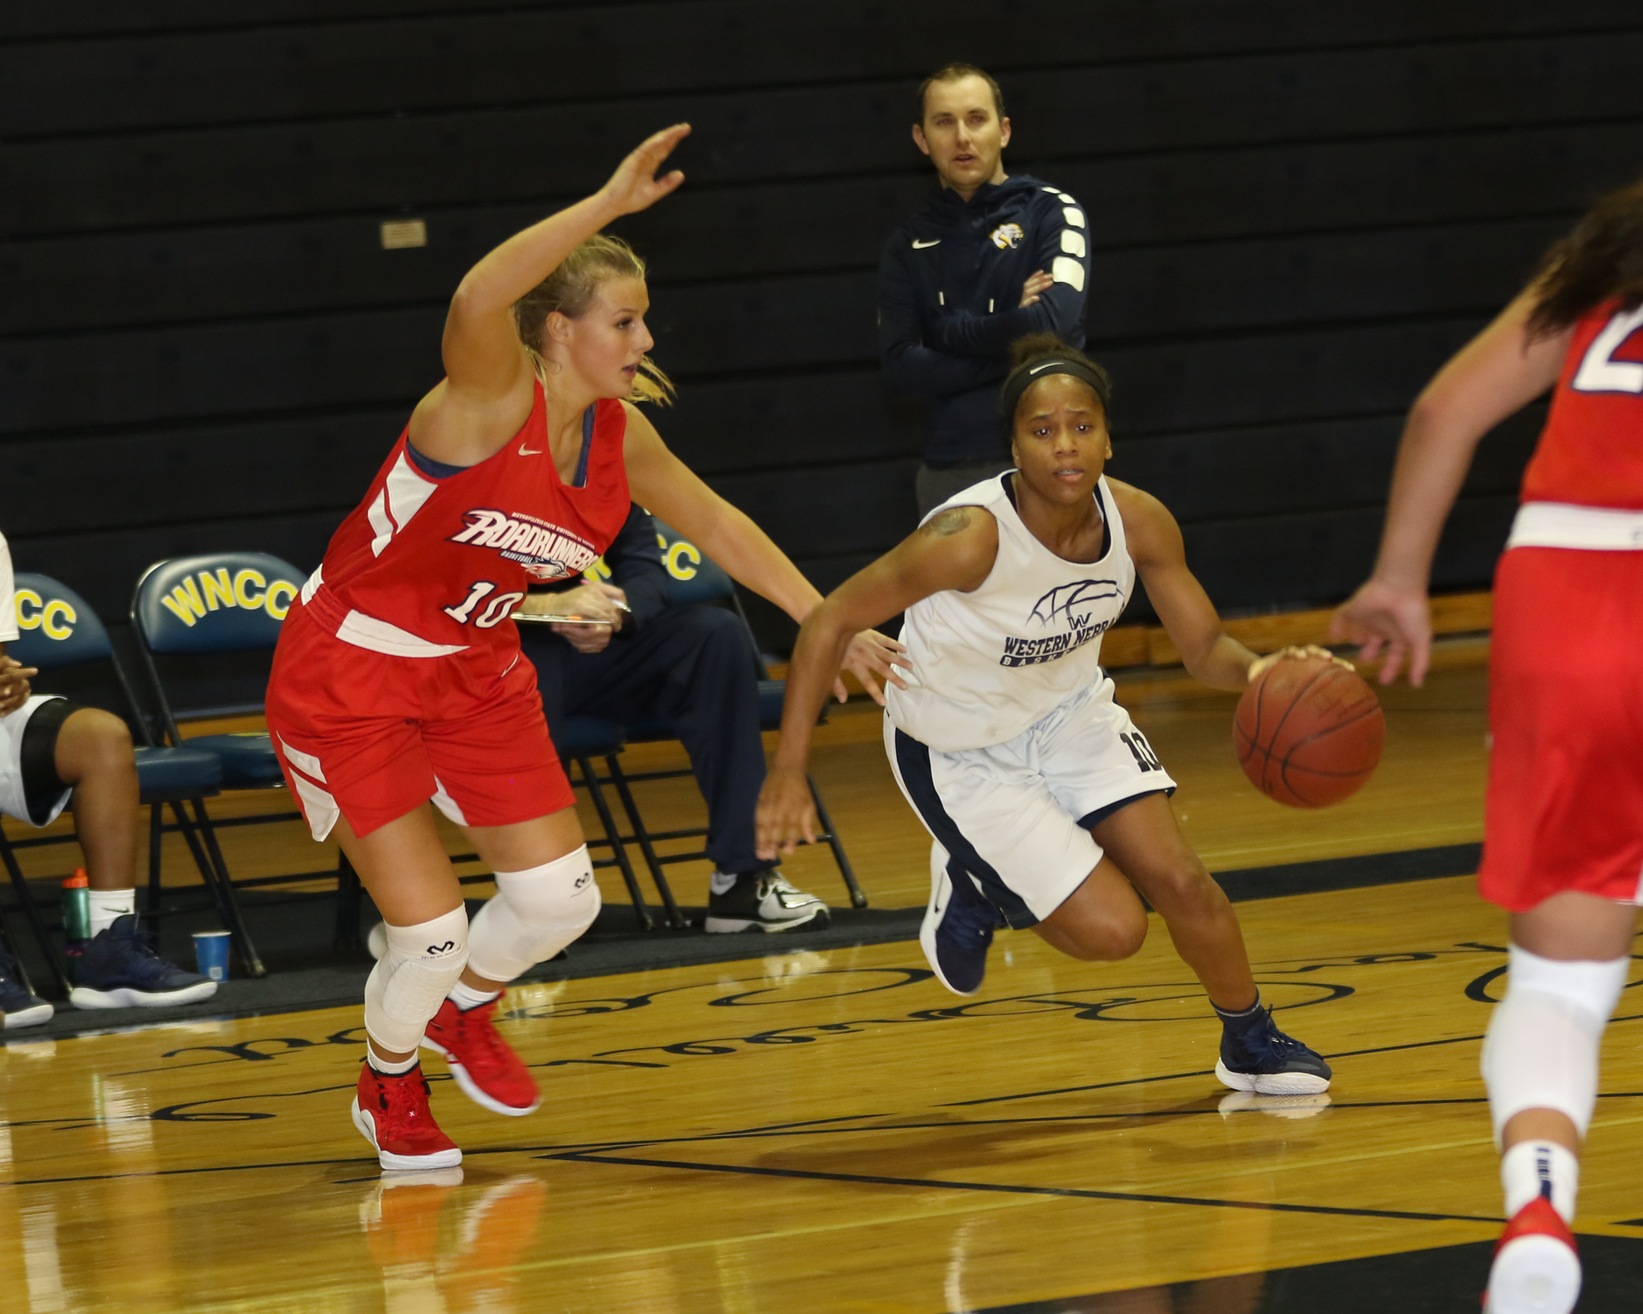 WNCC women’s basketball aiming for a third straight trip to nationals